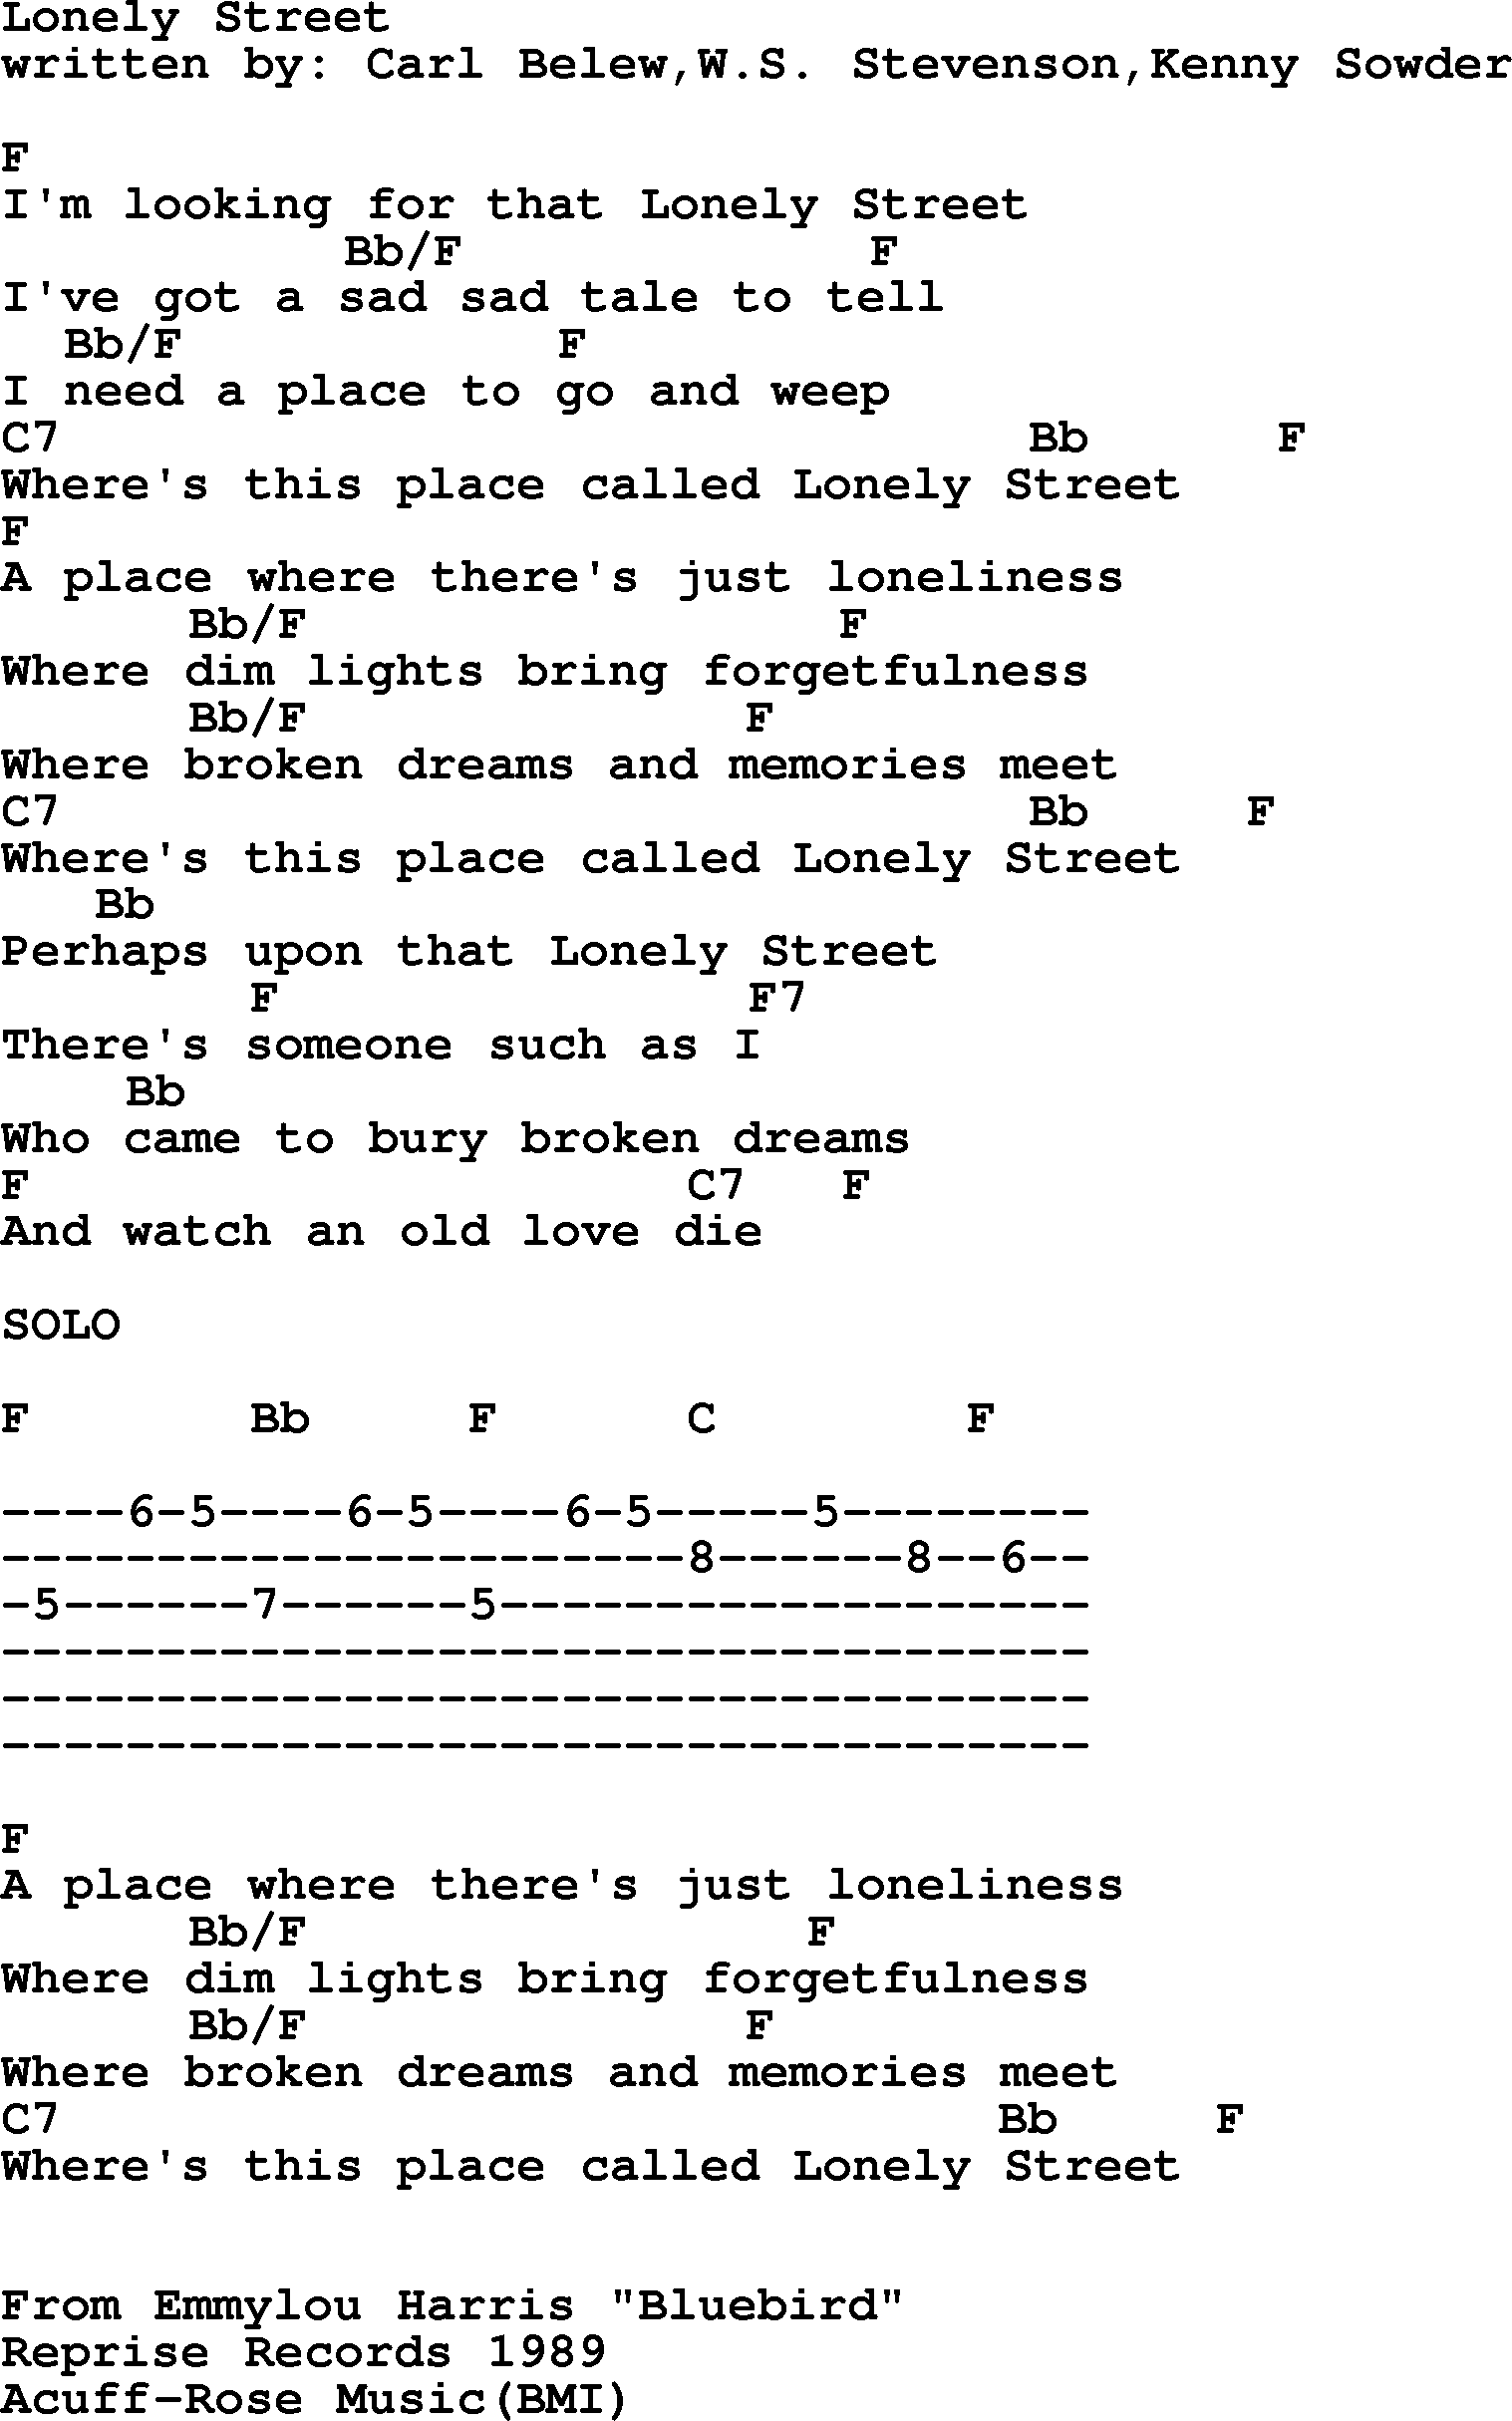 Emmylou Harris song: Lonely Street lyrics and chords